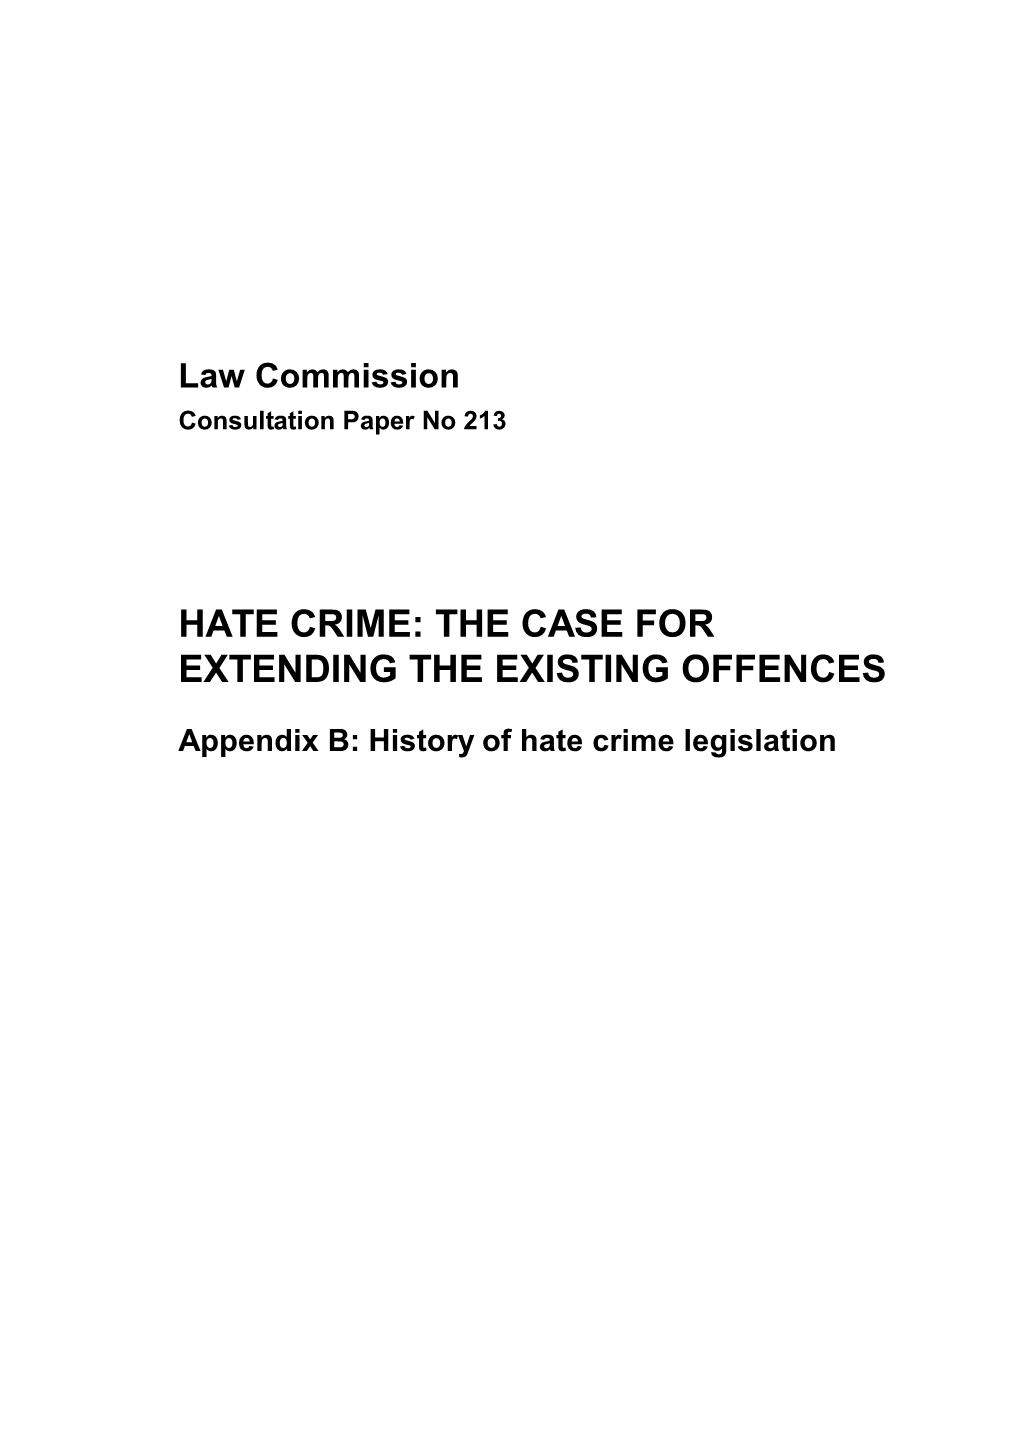 Hate Crime: the Case for Extending the Existing Offences